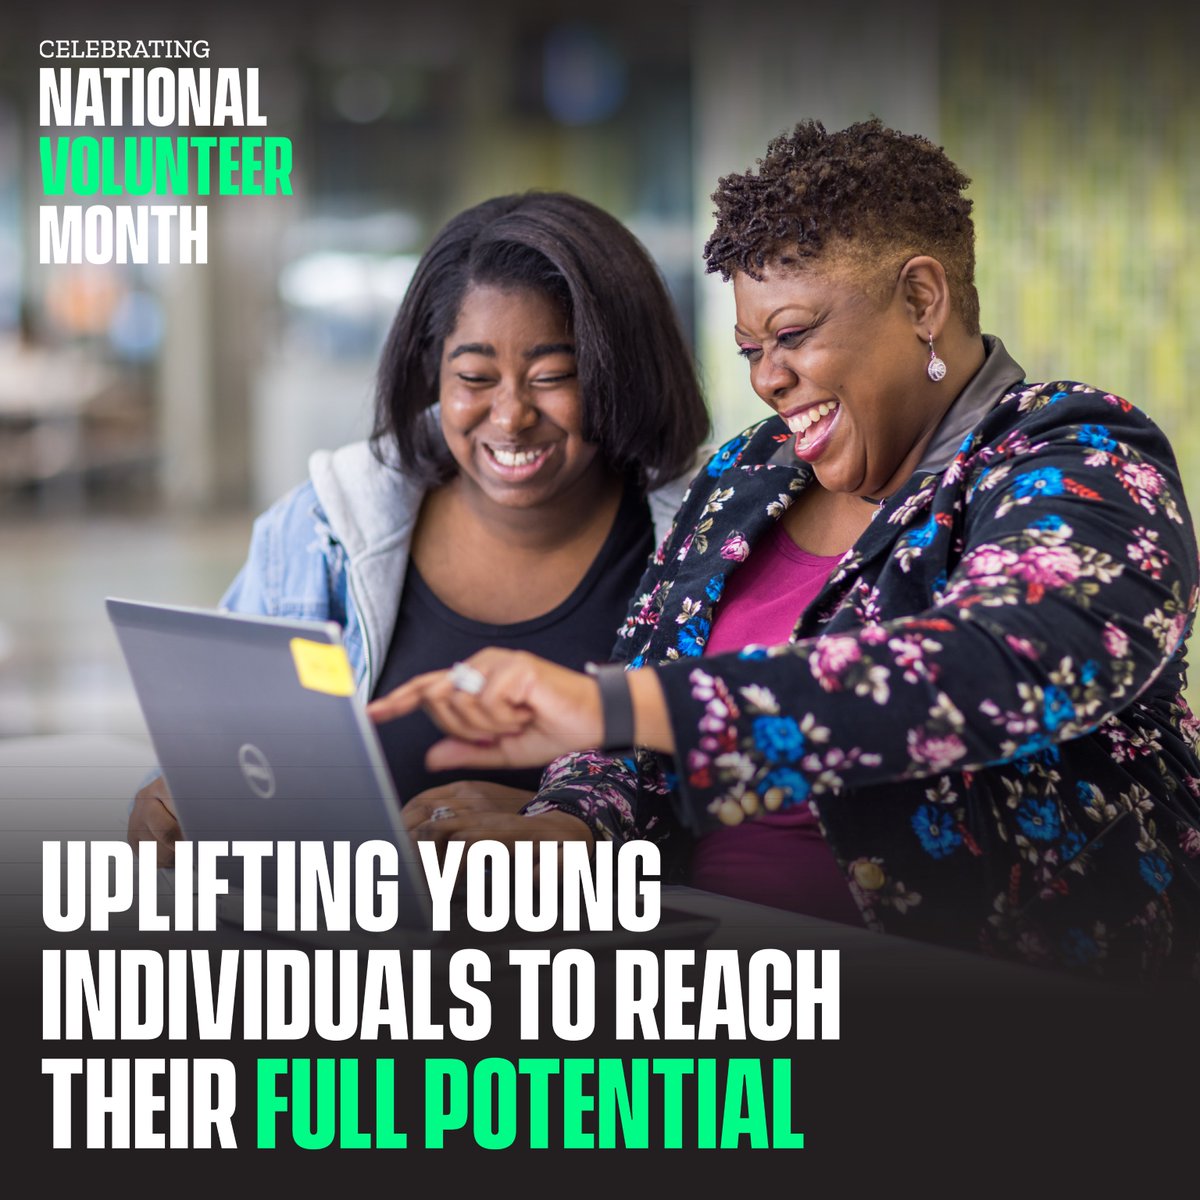 Empowering the next generation is a continuous commitment. As we celebrate #NationalVolunteerMonth, let's continue to foster positive change in our communities through mentorship. 

Join BBBSC in working towards a brighter future: ow.ly/rIL350RjtyA
#BeBig #BiggerTogether